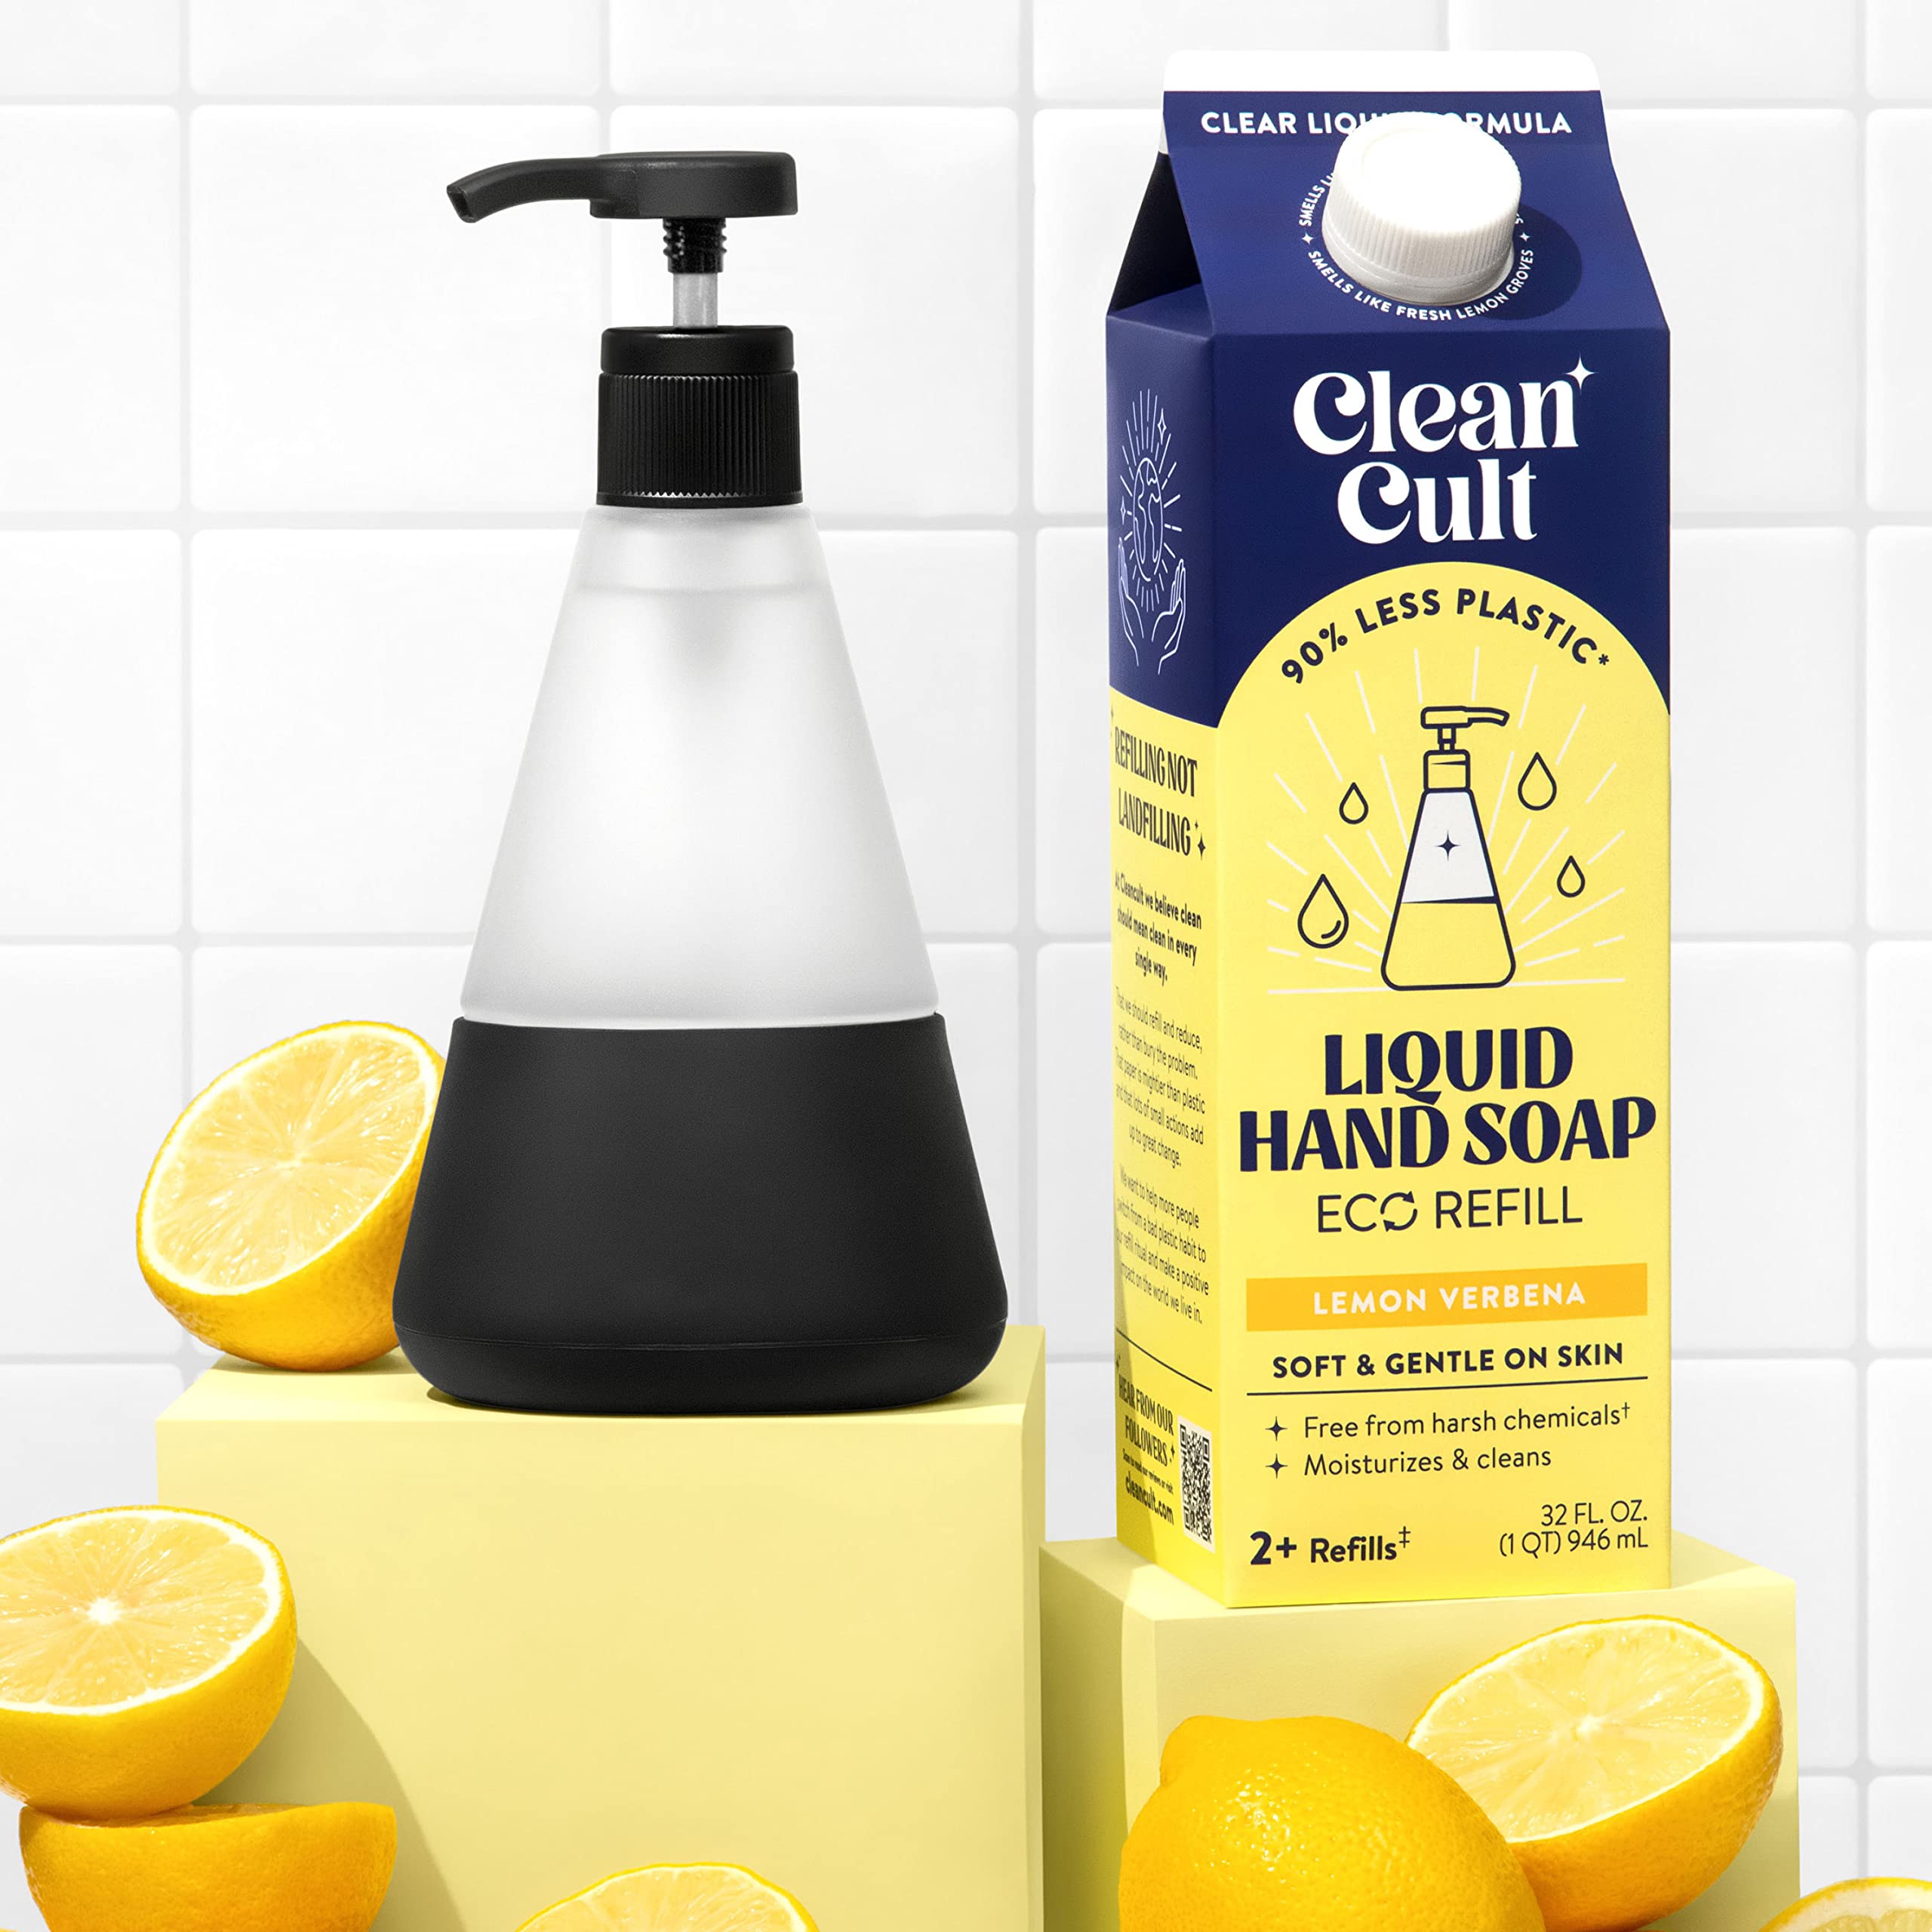 Cleancult - Liquid Hand Soap Refills - Lemon Verbena - Made with Aloe Vera & Essential Oil - Nourishes & Moisturizes Dry & Sensitive Skin - Eco Friendly - Paper-Based Packaging - 32 oz/6 Pack